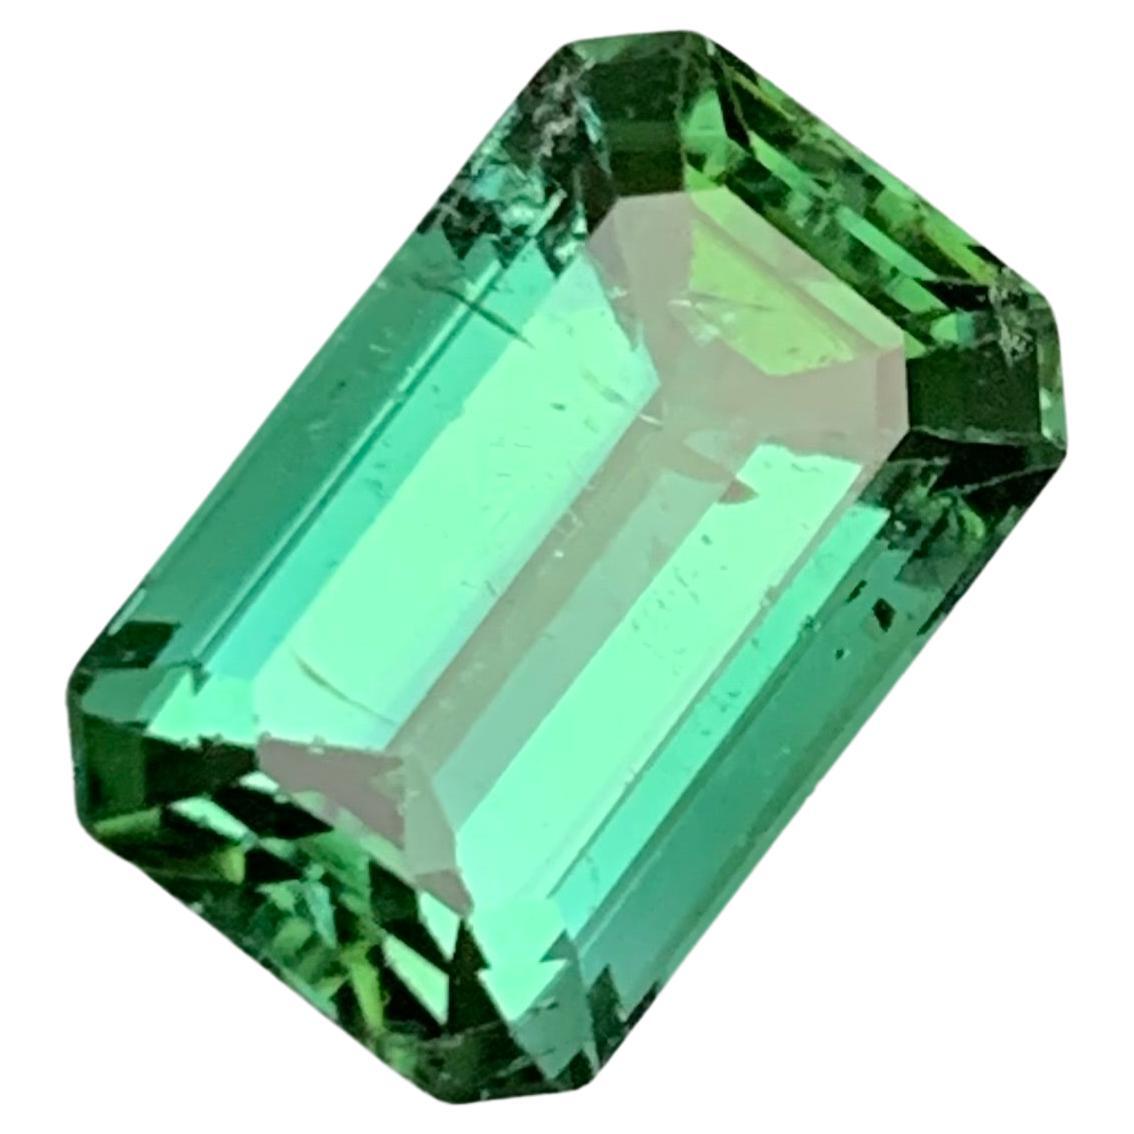 Rare Green Natural Tourmaline Gemstone 4.80 Ct Step Emerald Cut for Ring/Jewelry